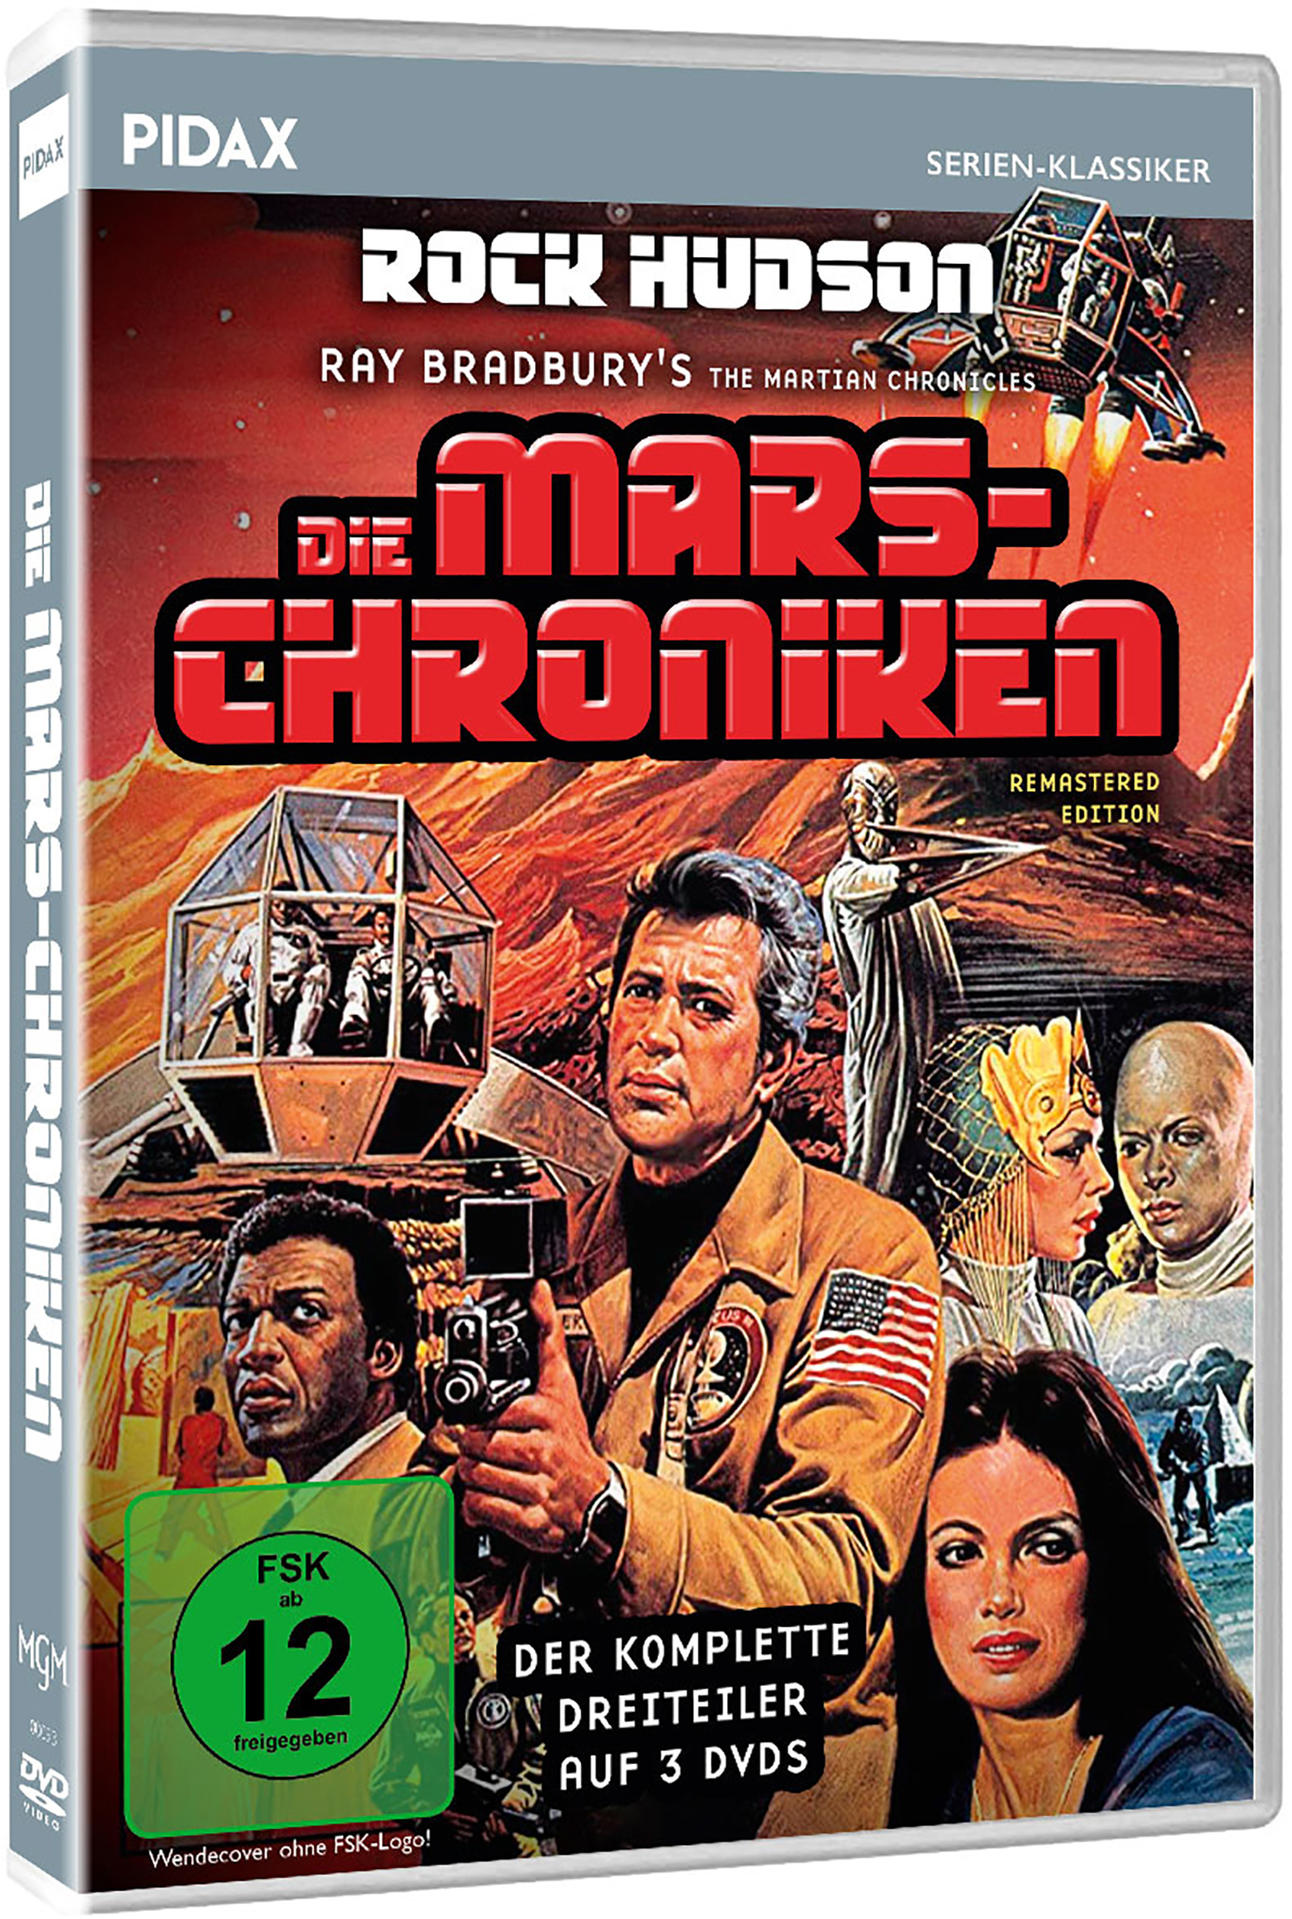 Chronicles) Mars-Chroniken - Die Martian DVD Remastered Edition (The